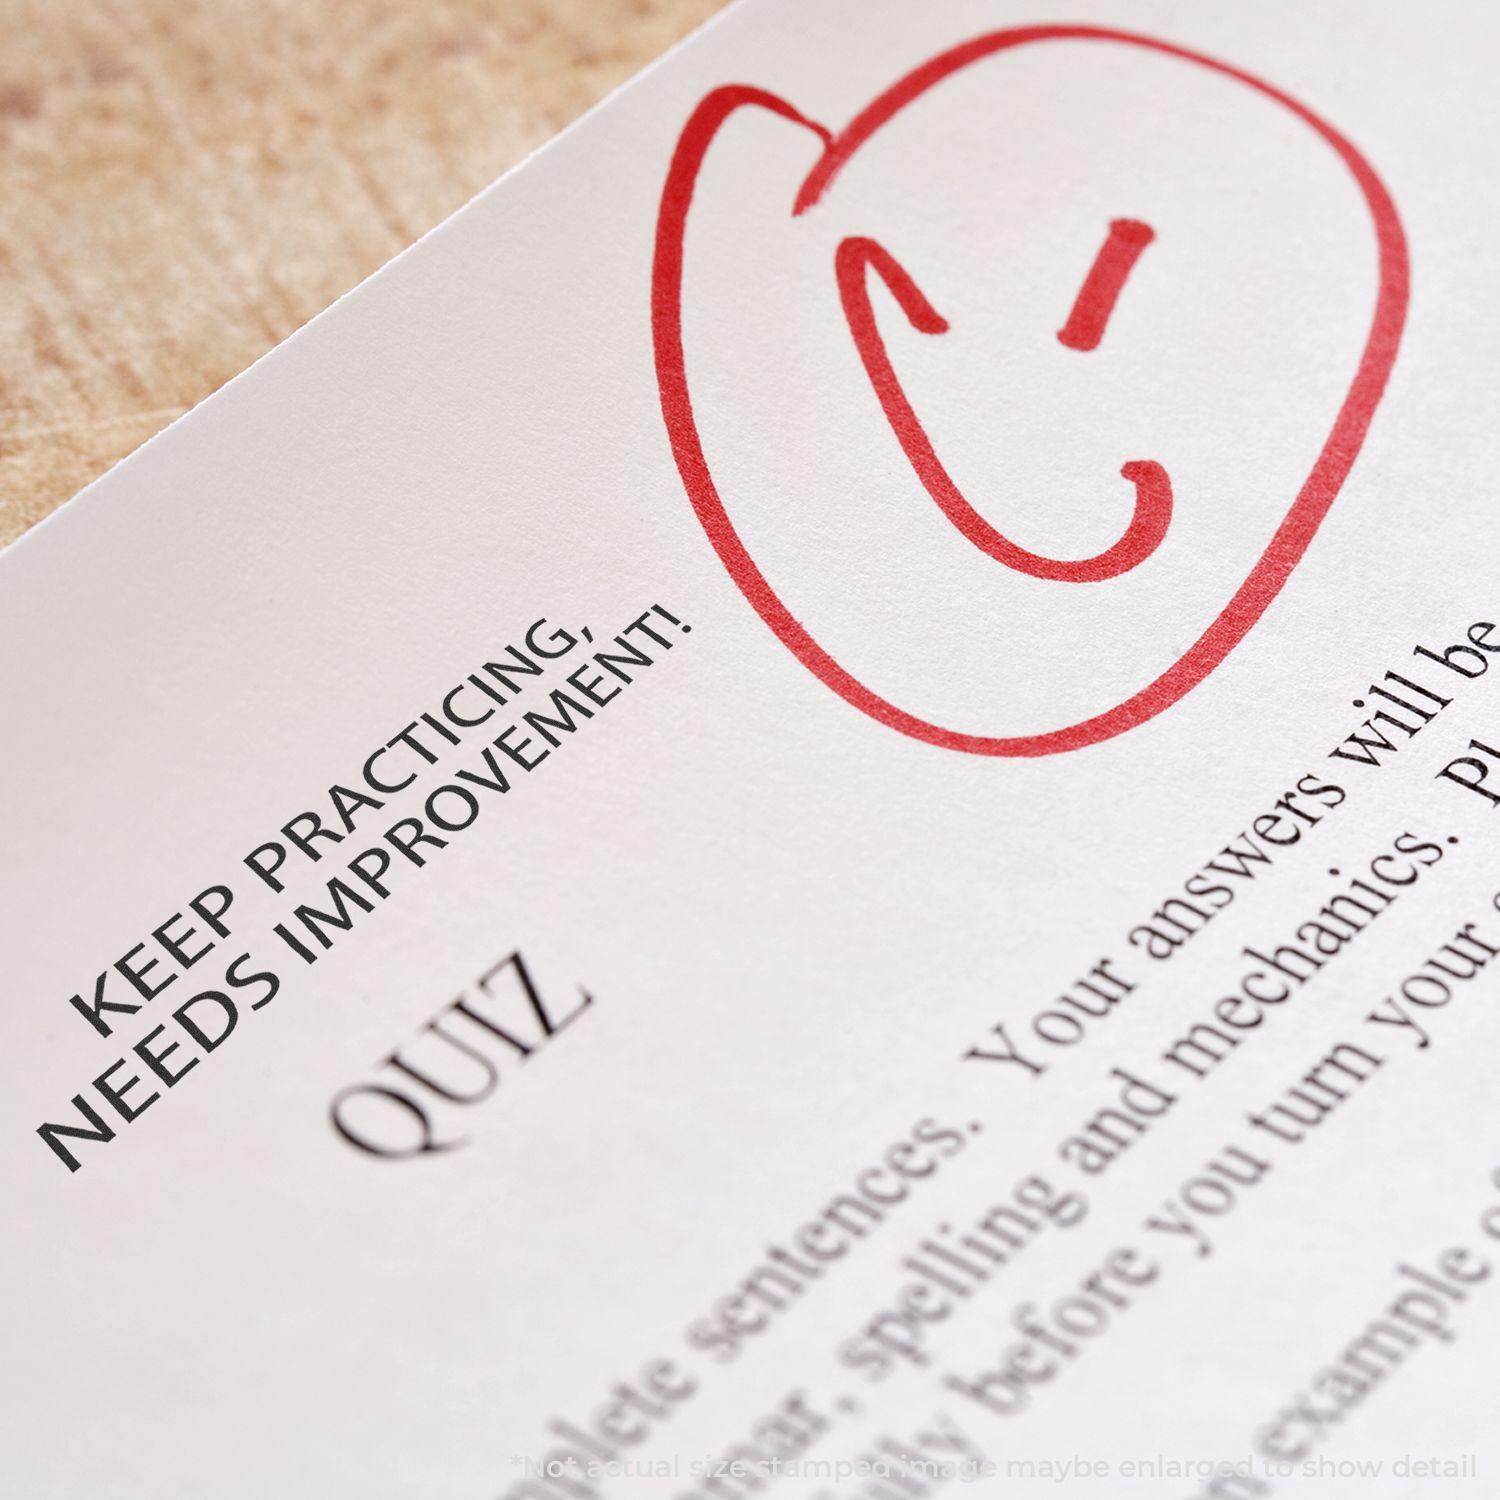 A stock office rubber stamp with a stamped image showing how the text "KEEP PRACTICING, NEEDS IMPROVEMENT!" in a large font is displayed after stamping.